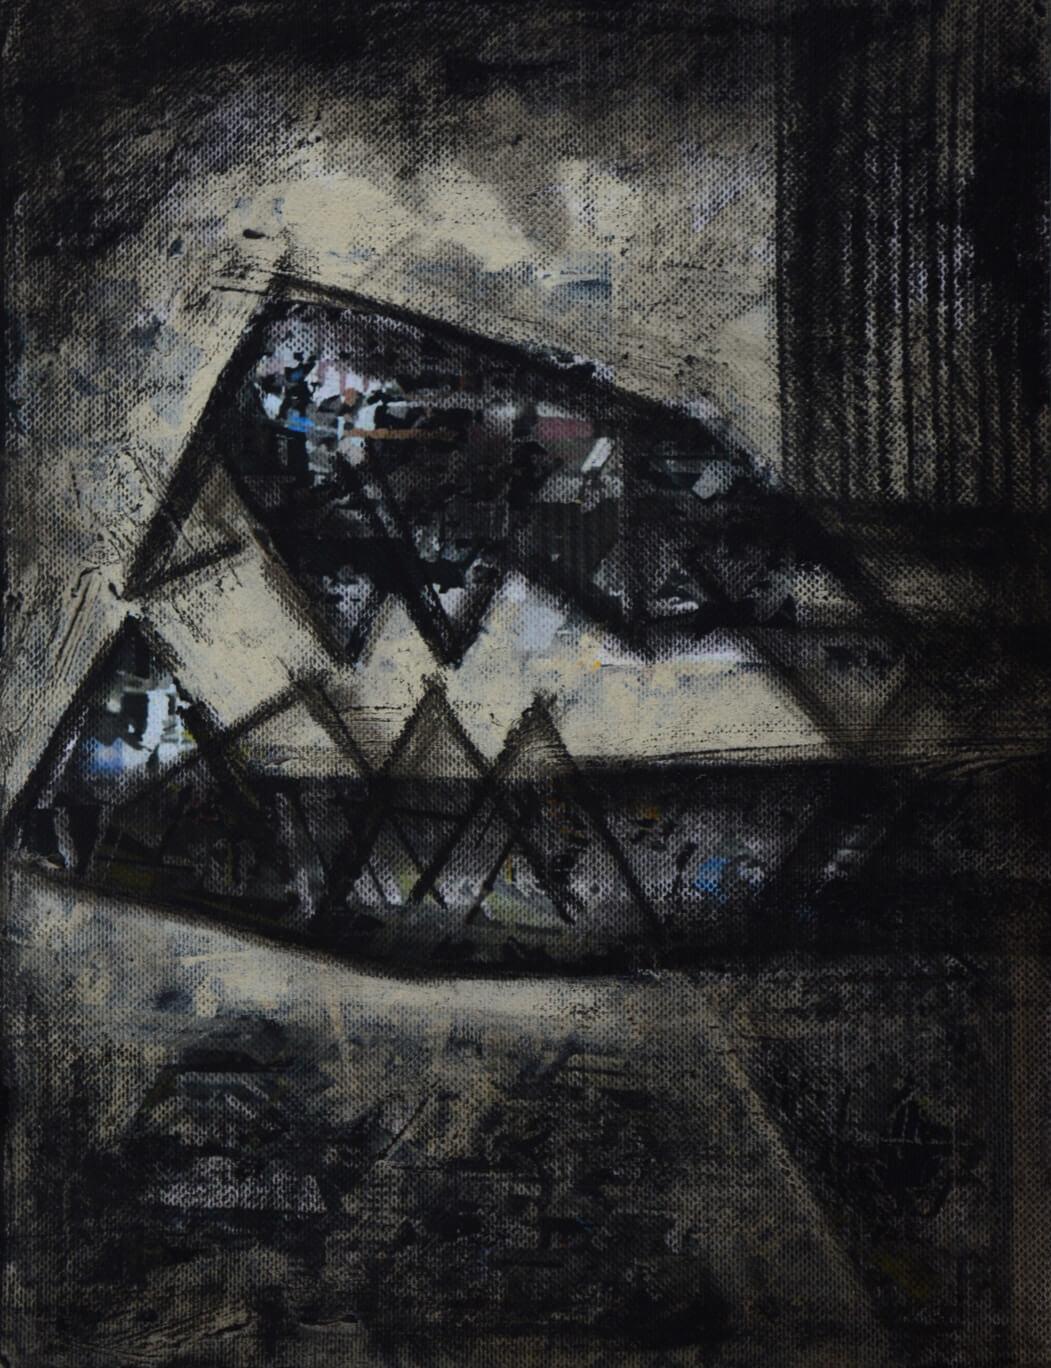 Rajib Bhattacharjee Abstract Painting - Untitled, Abstracts, Charcoal, Acrylic on Transfer Print Indian Artist"In Stock"